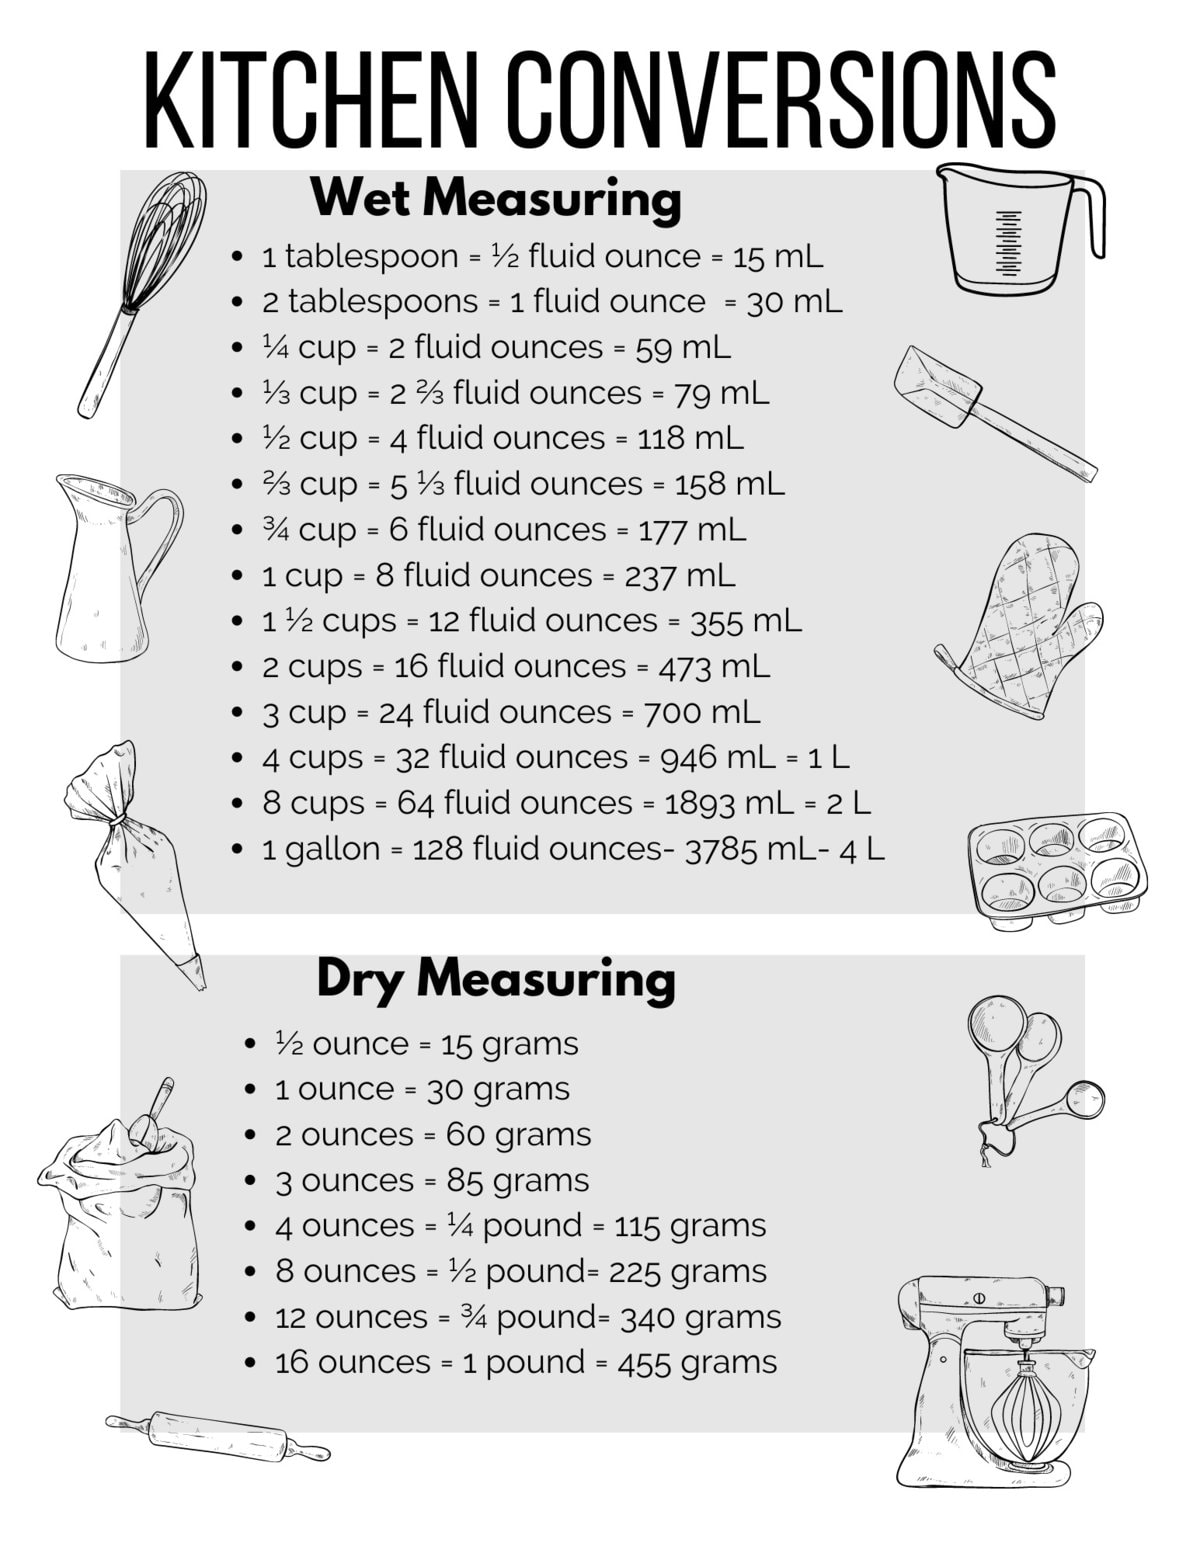 How to Measure Ounces